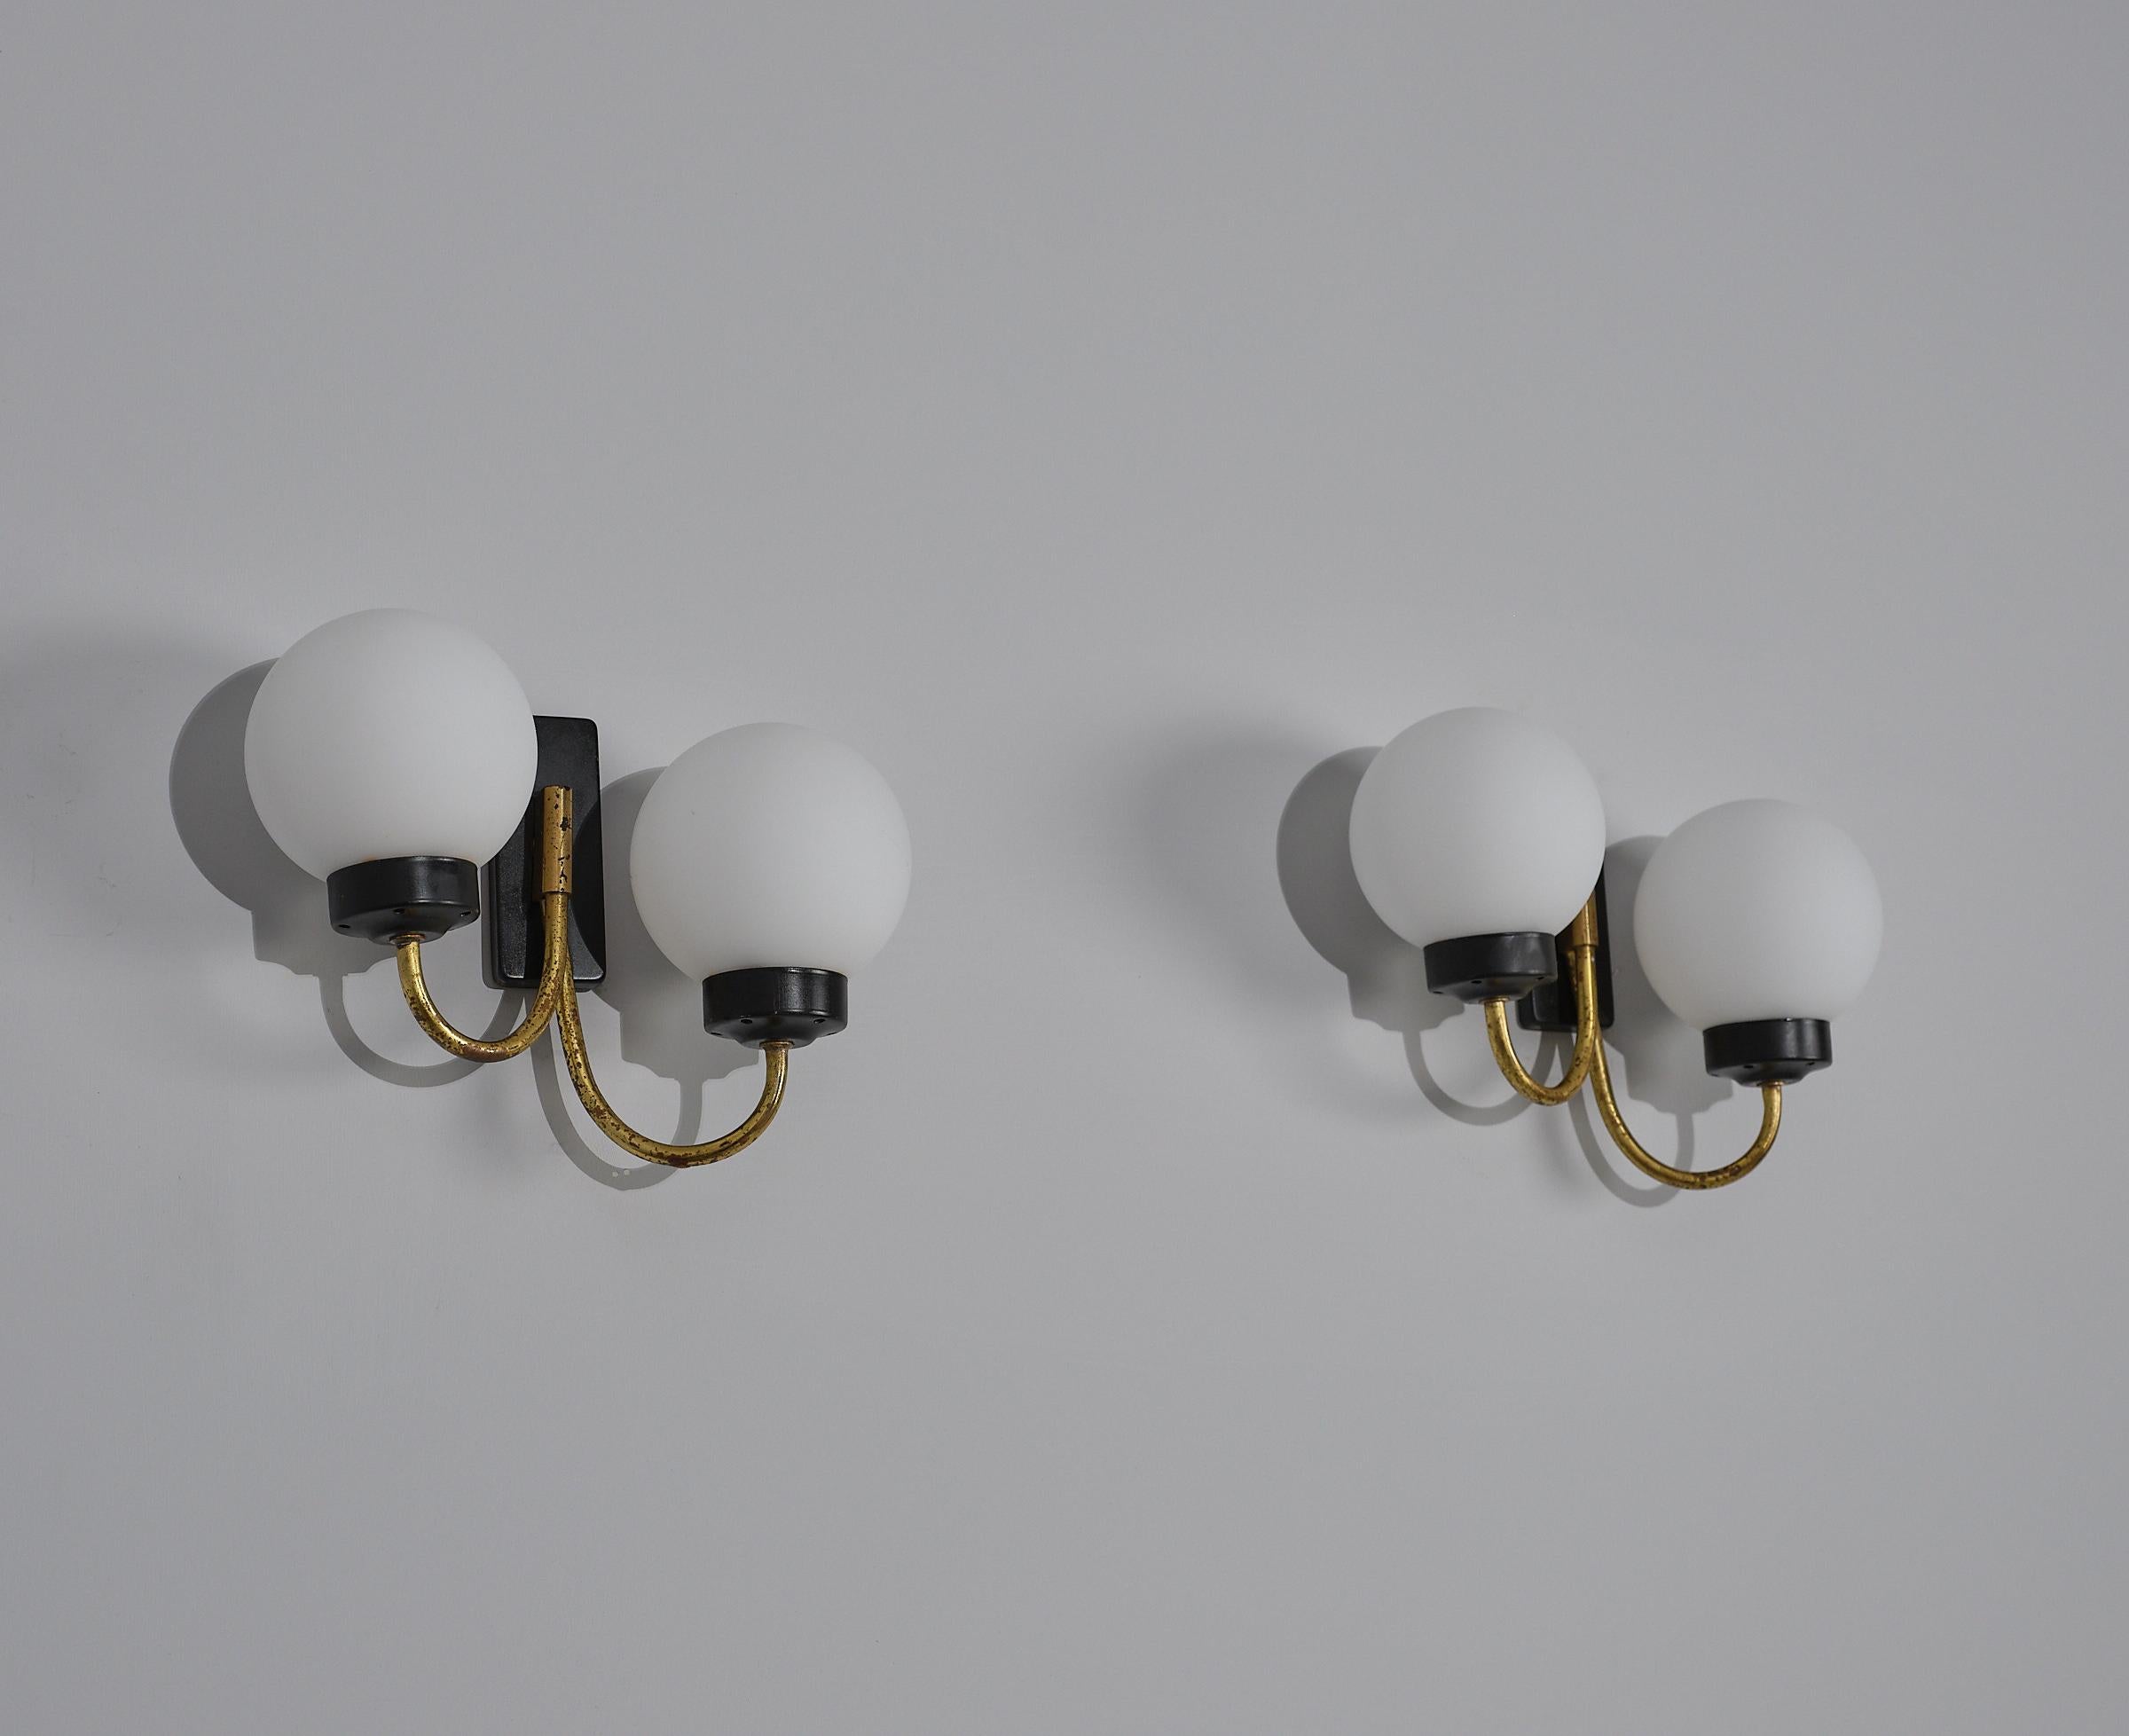 Mid-20th Century Pair of Italian Design Wall Sconces - 1950s Vintage, Brass and Black Metal For Sale